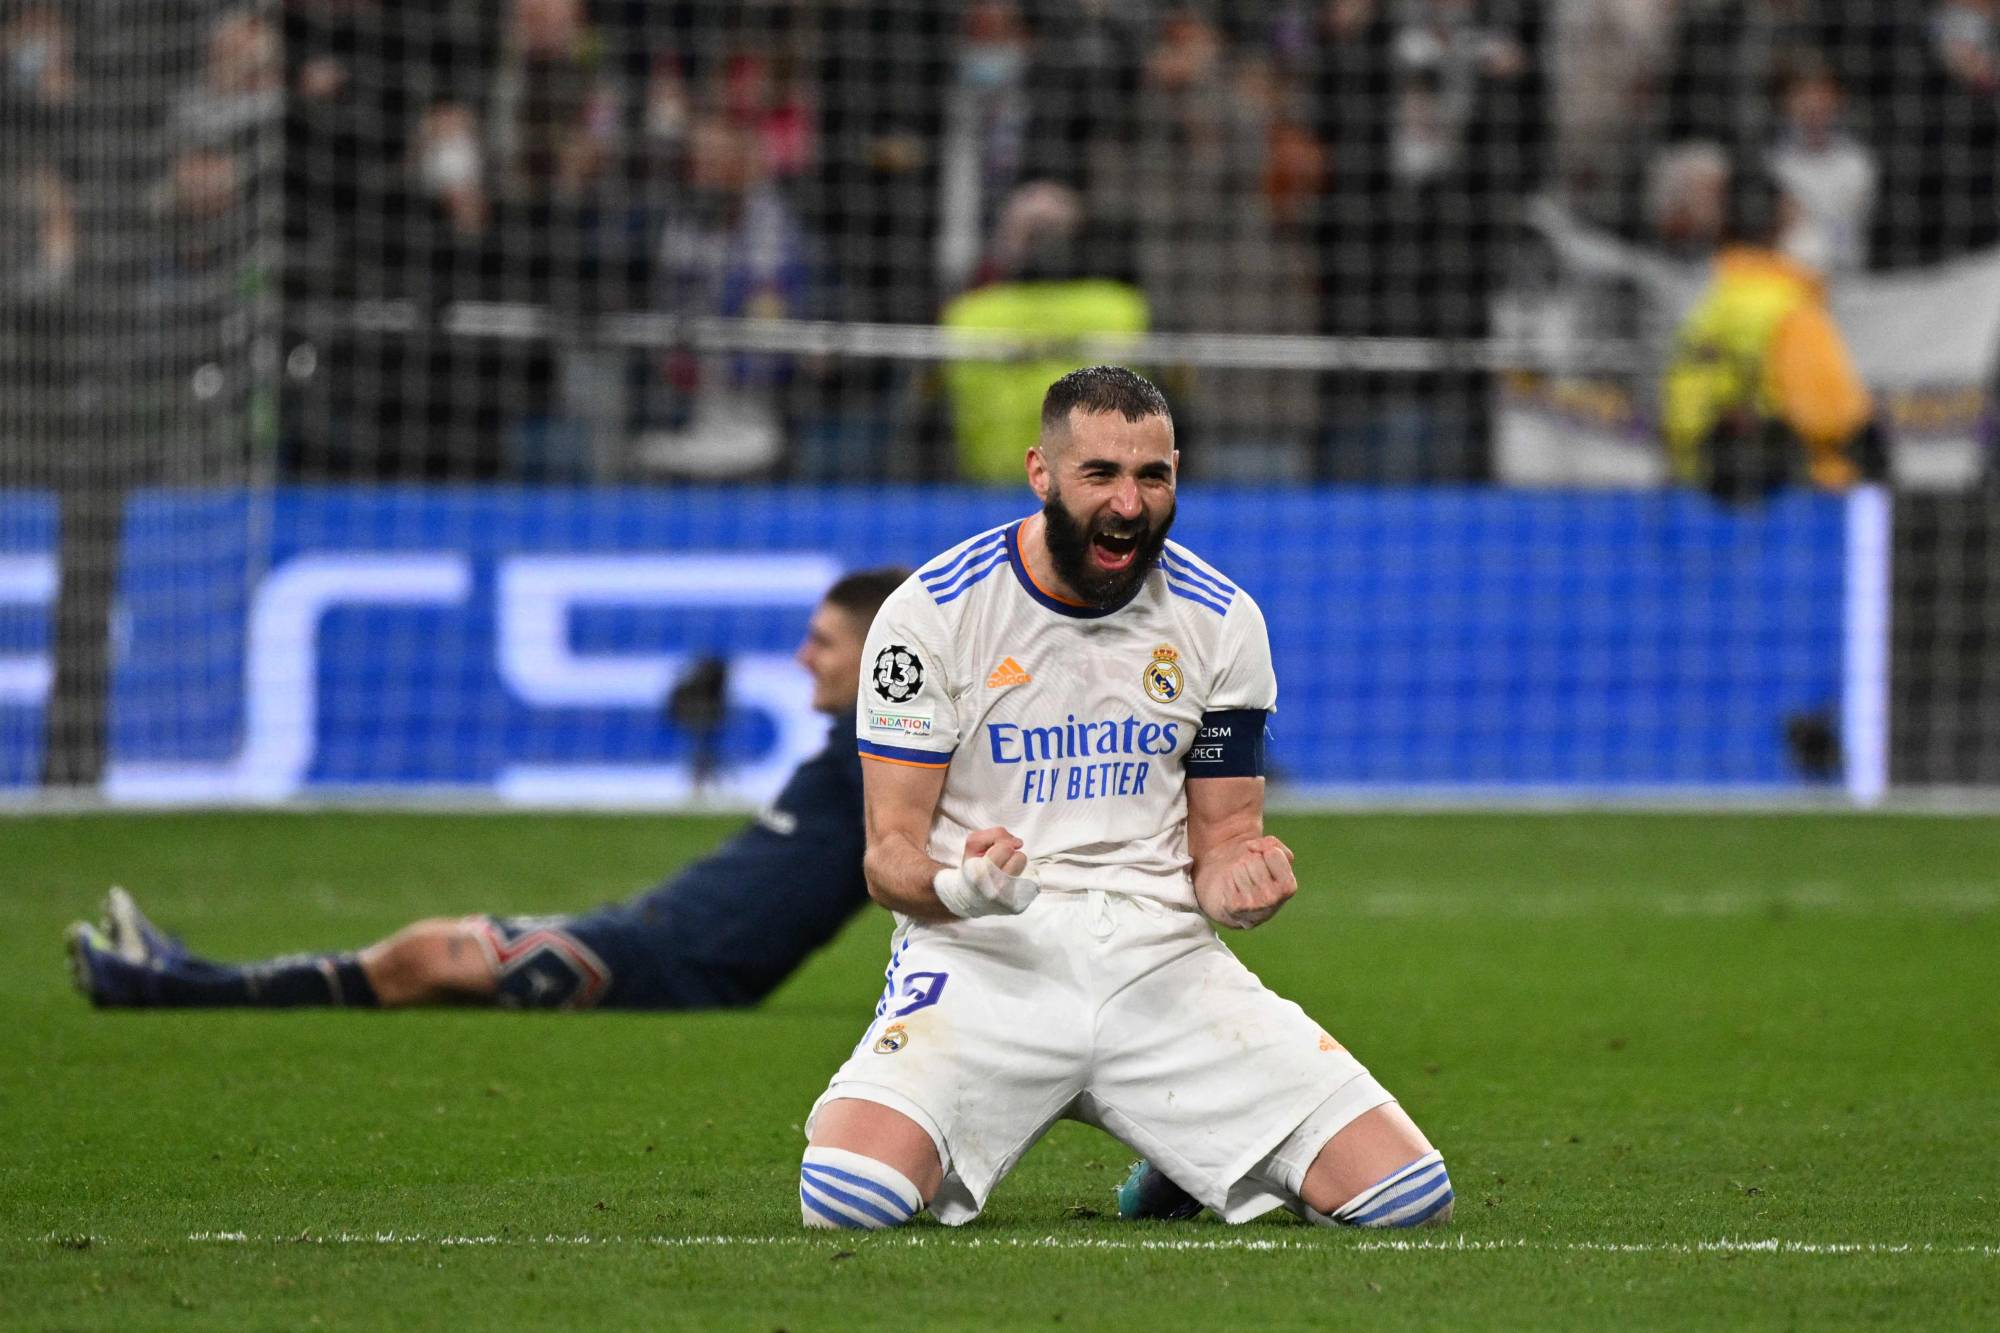 Real Madrid's French forward Karim Benzema celebrates after scoring a goal during the UEFA Champions League round of 16 second league football match between Real Madrid CF and Paris Saint-Germain at the Santiago Bernabeu stadium in Madrid on March 9, 2022. (Photo by GABRIEL BOUYS / AFP)